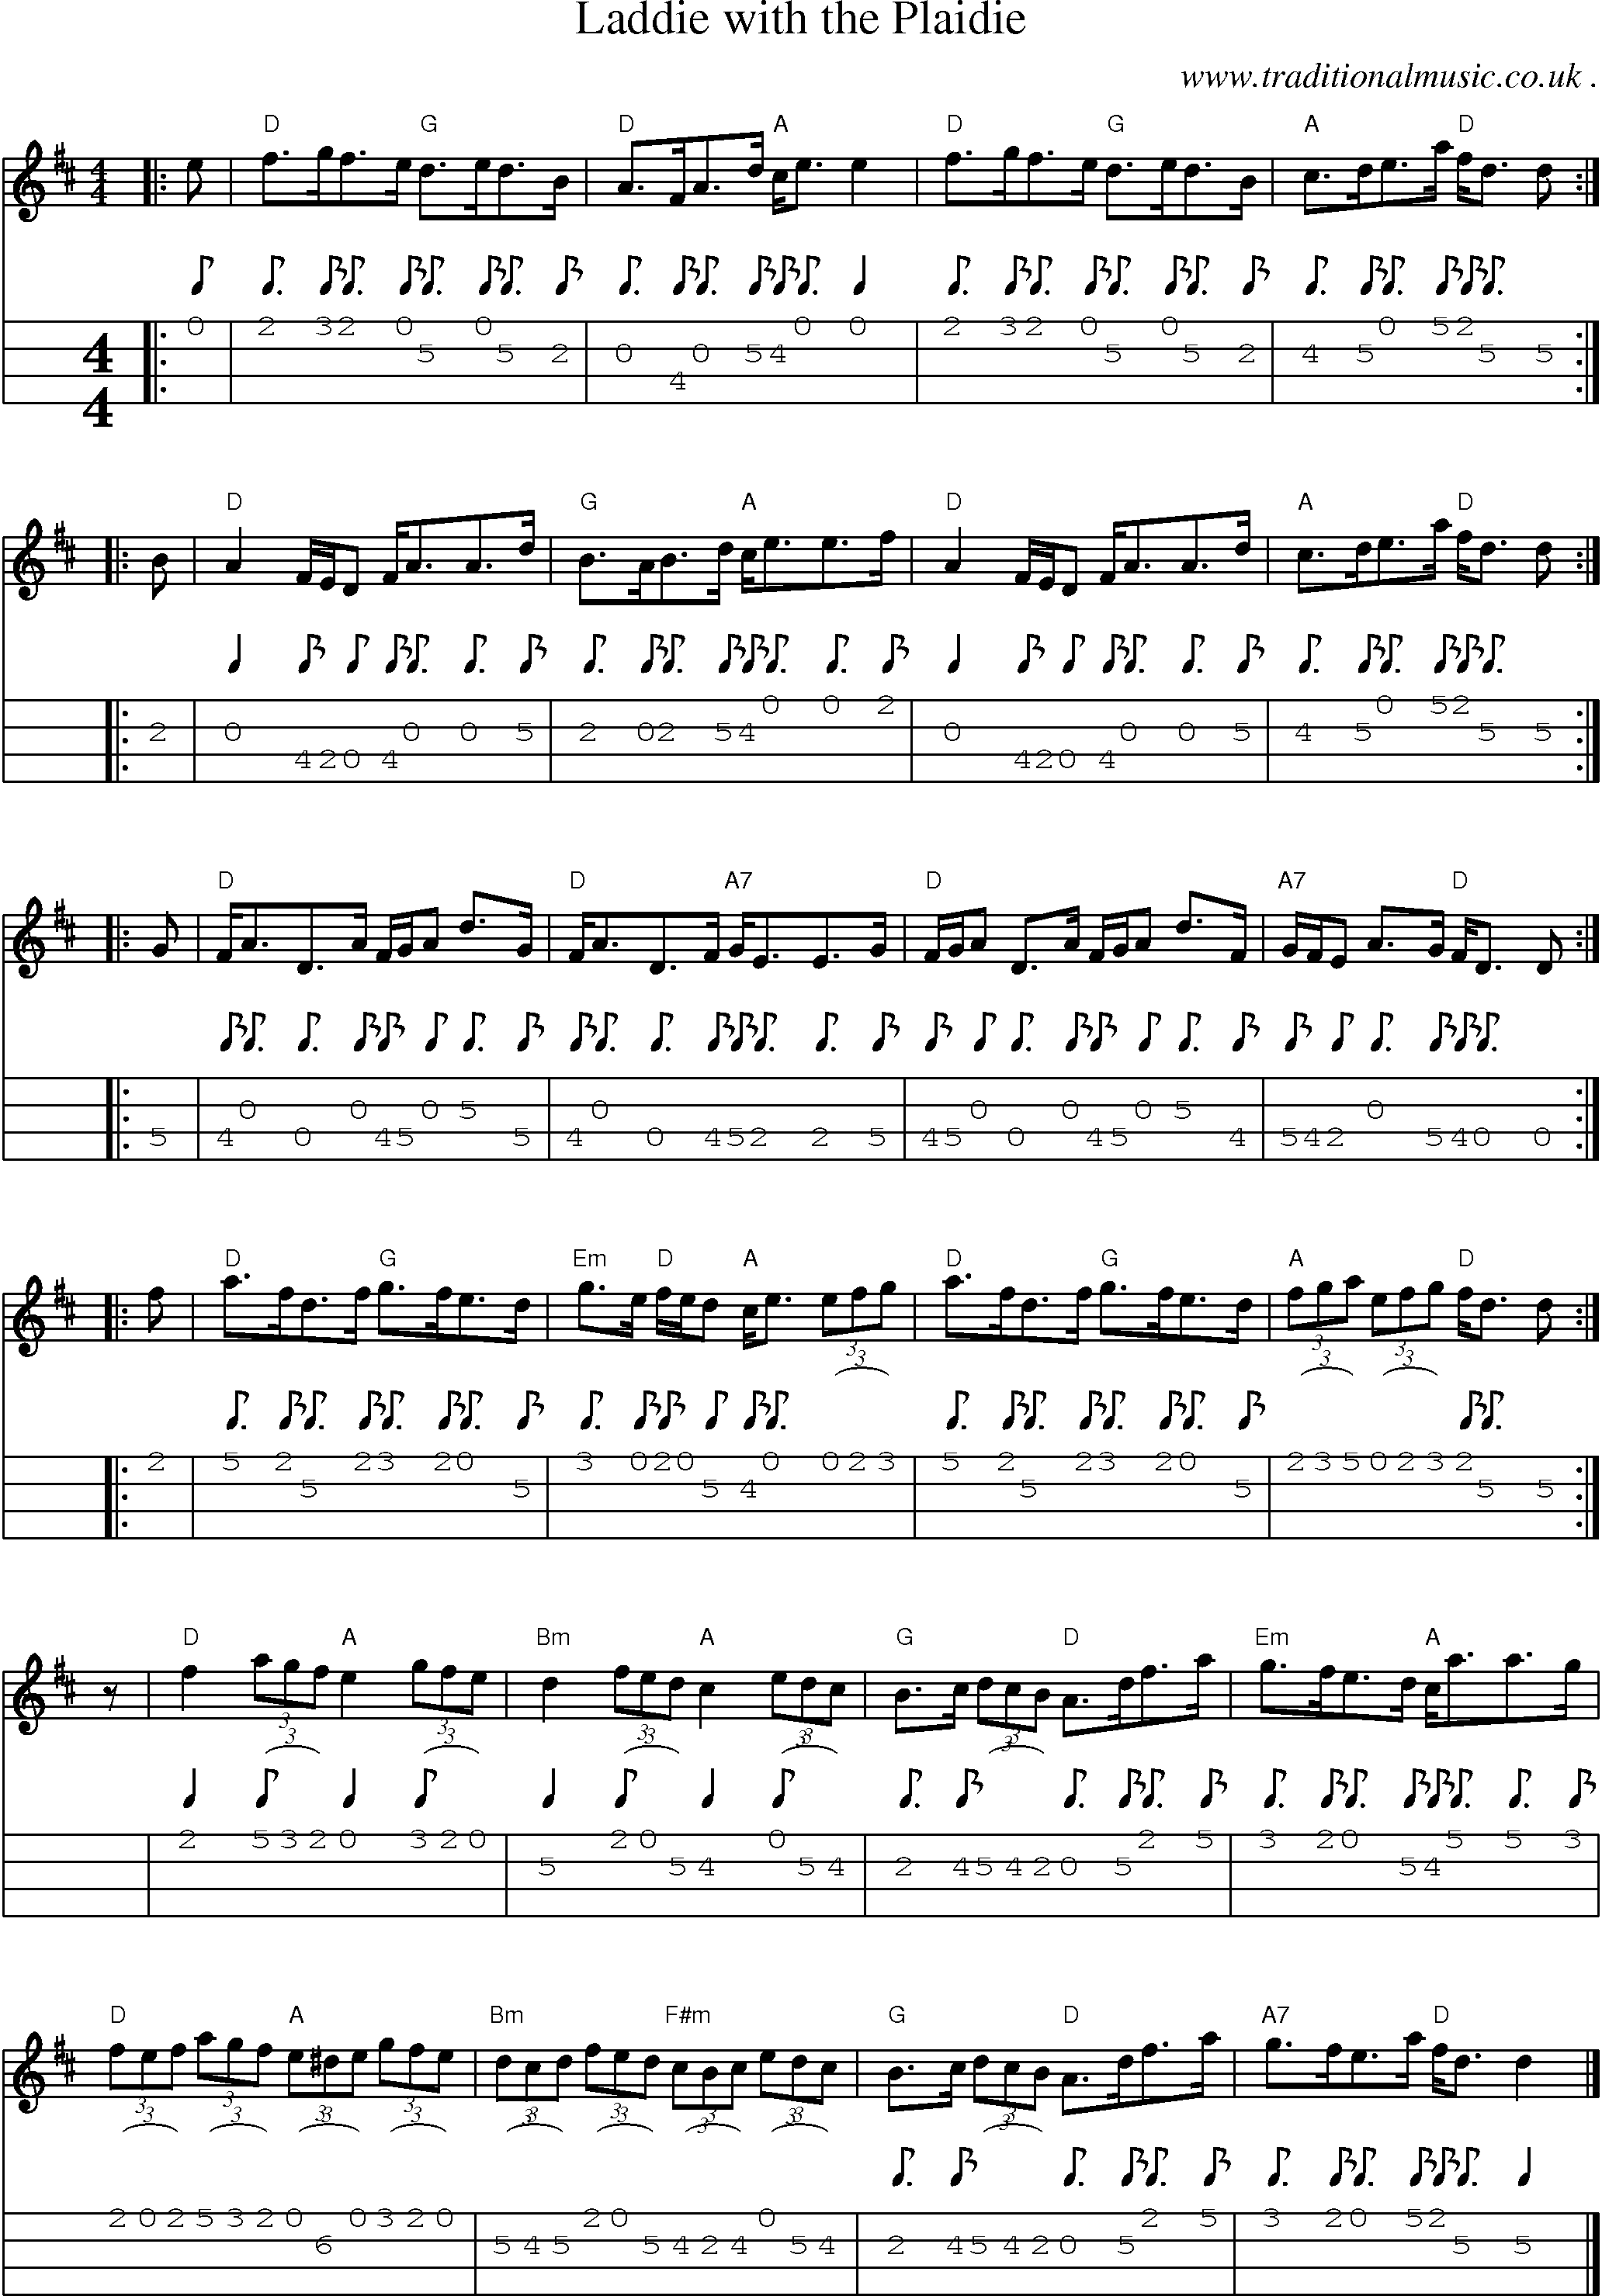 Sheet-music  score, Chords and Mandolin Tabs for Laddie With The Plaidie